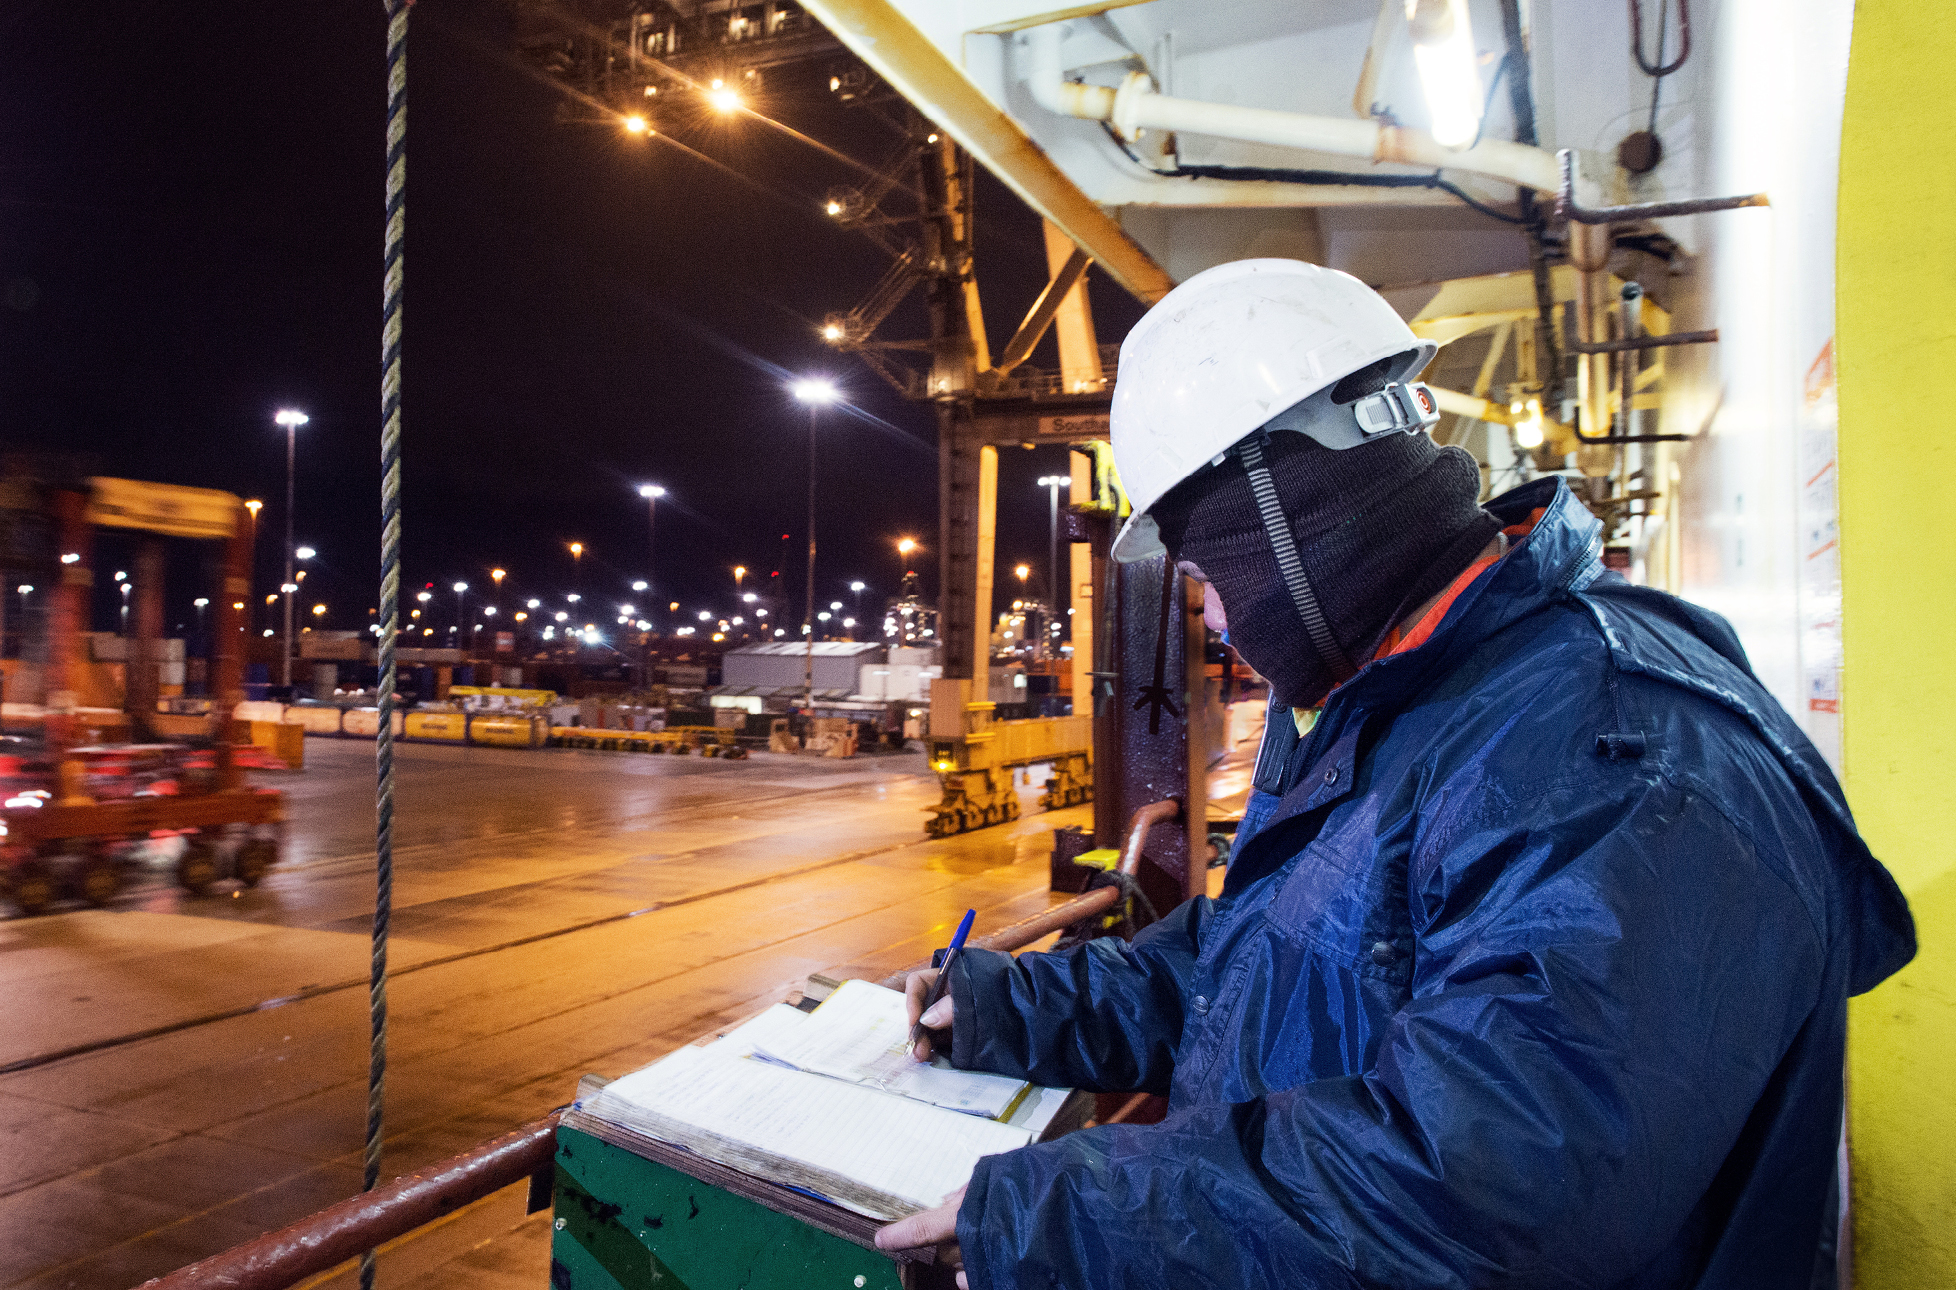 Seafaring workman completing paperwork on site at night